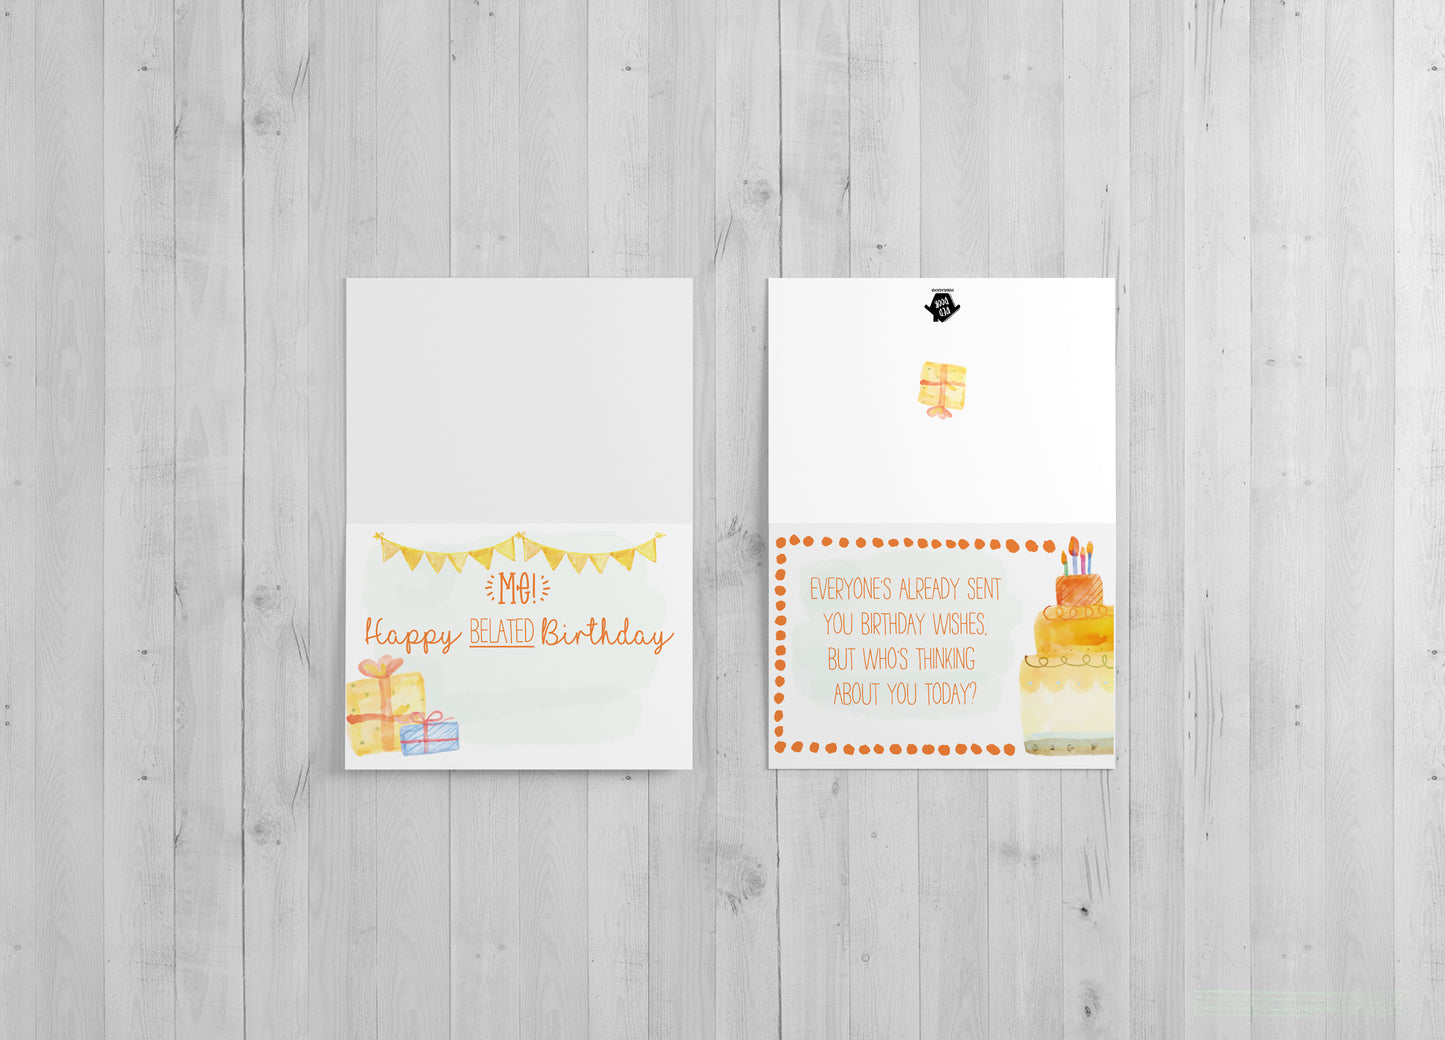 Belated Birthday Humorous - Includes 25 cards